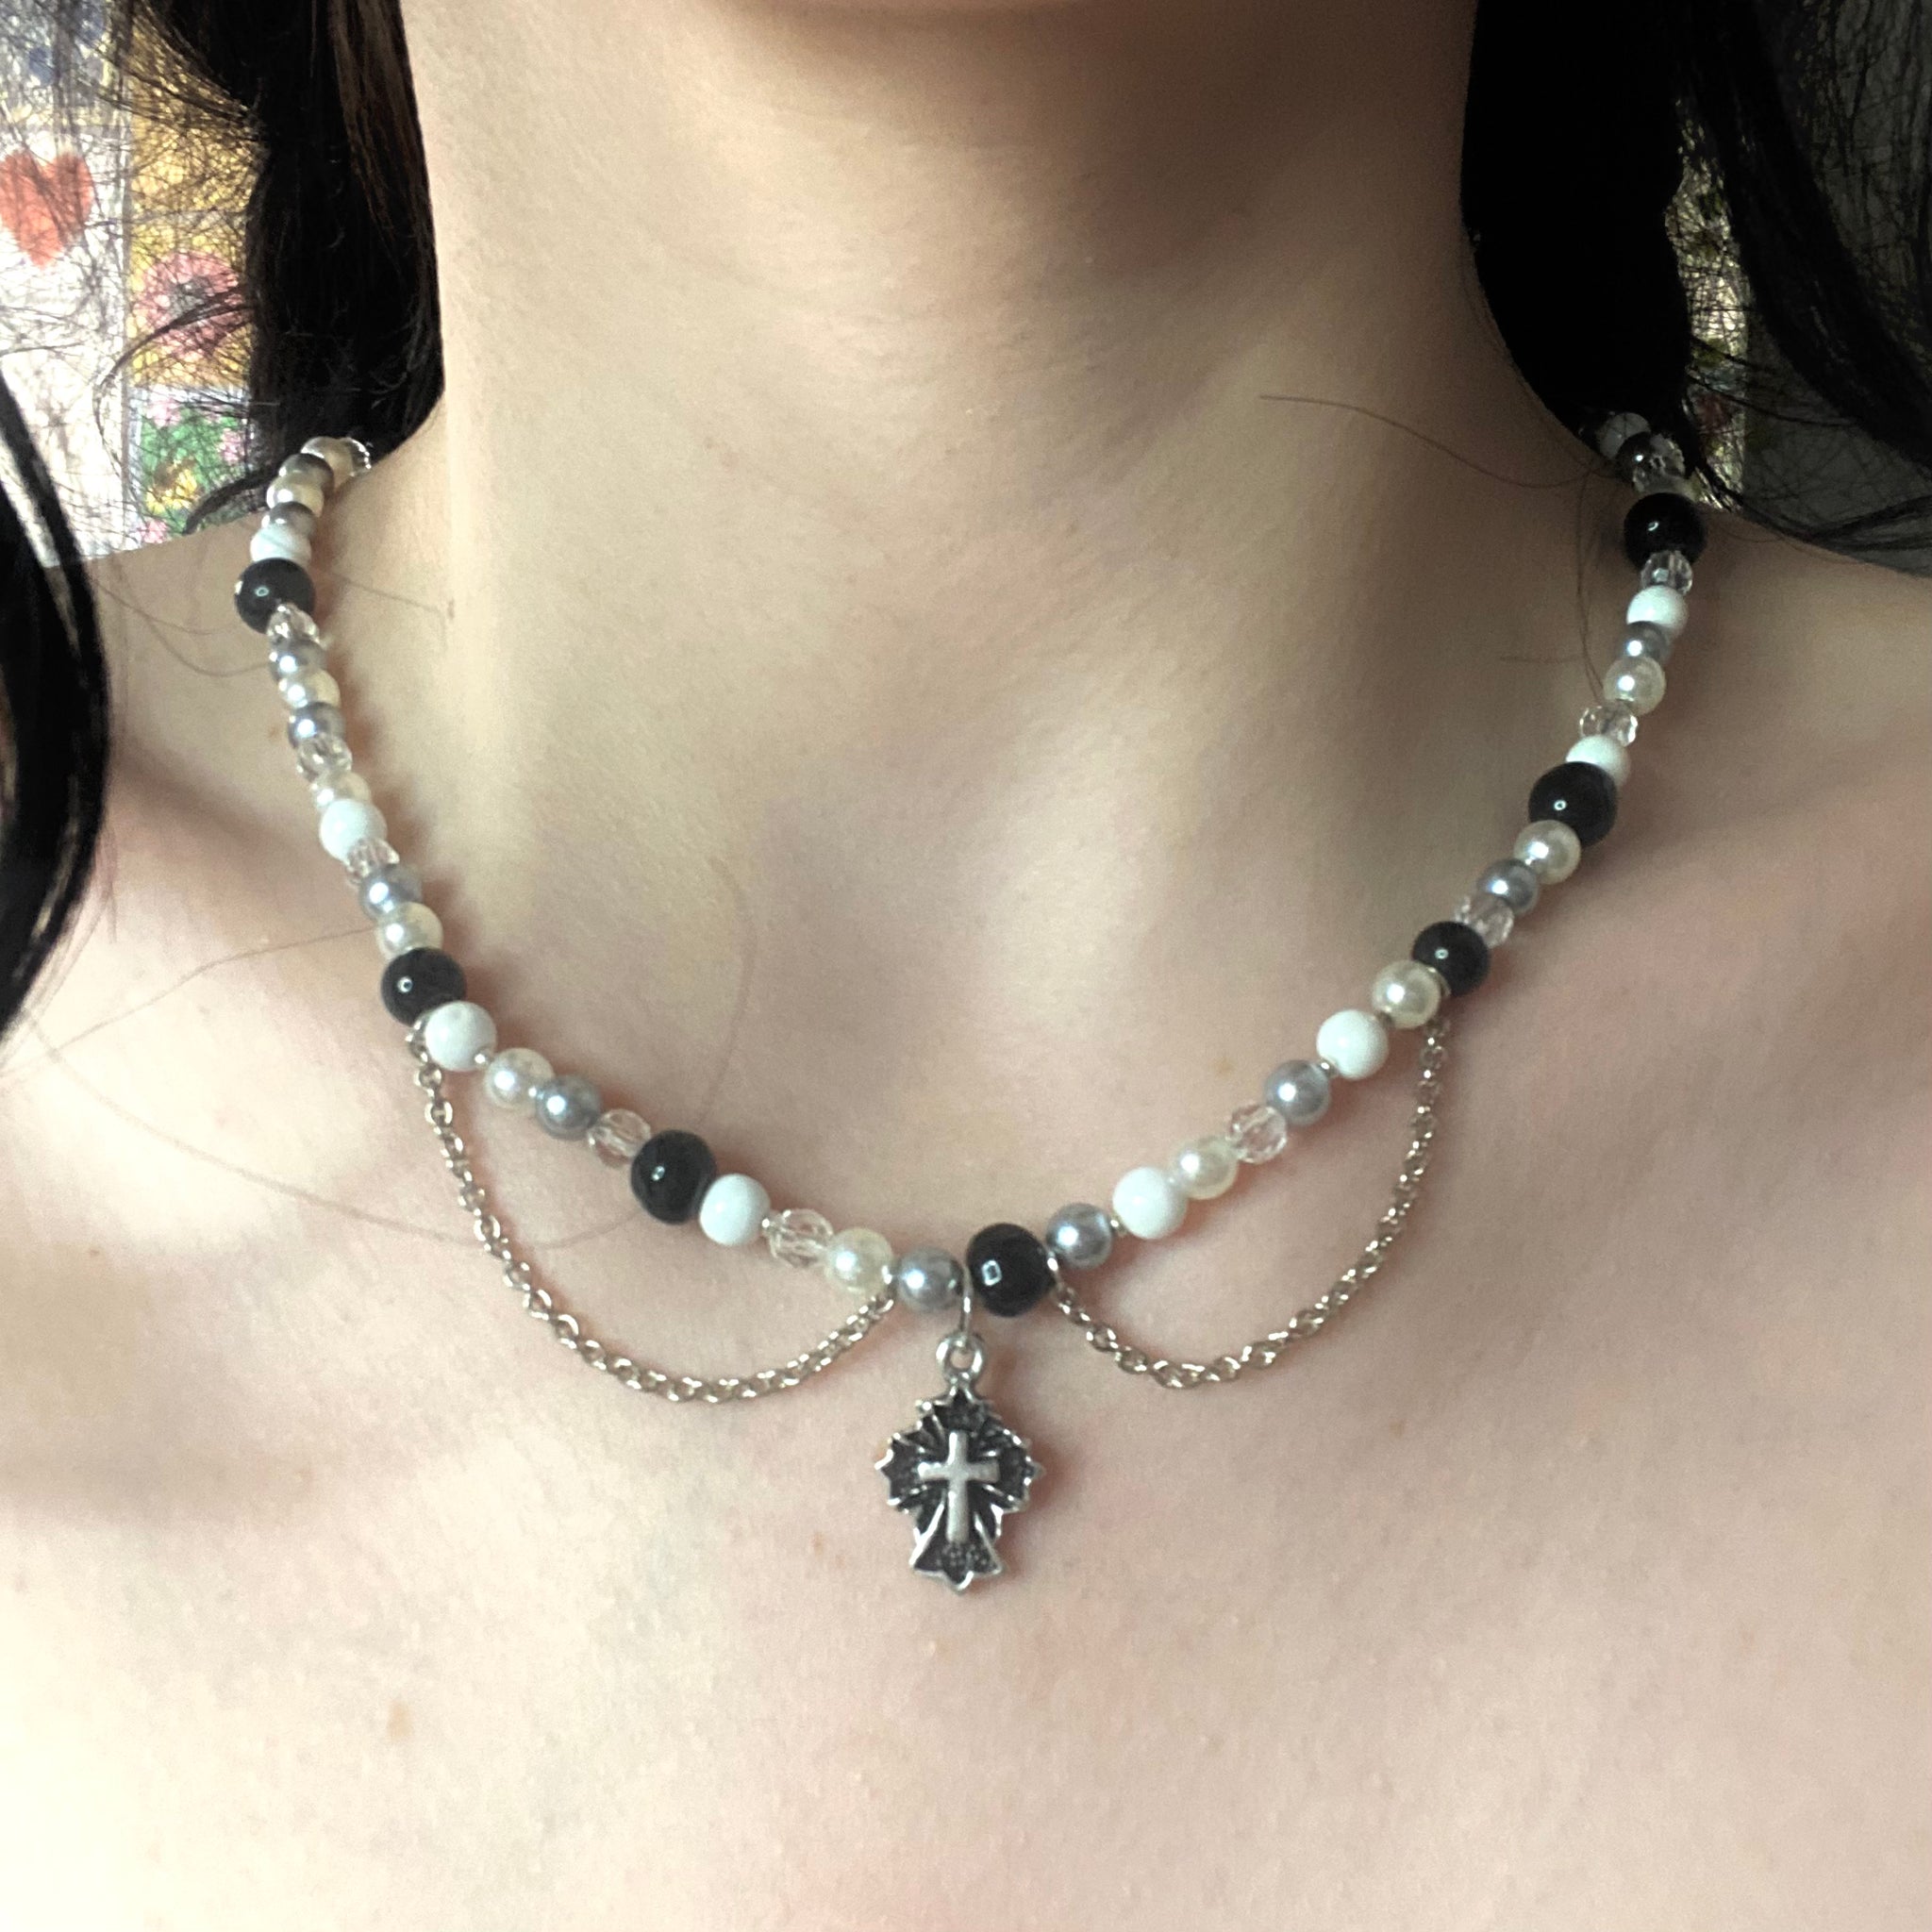 “Mary on a Cross” necklace